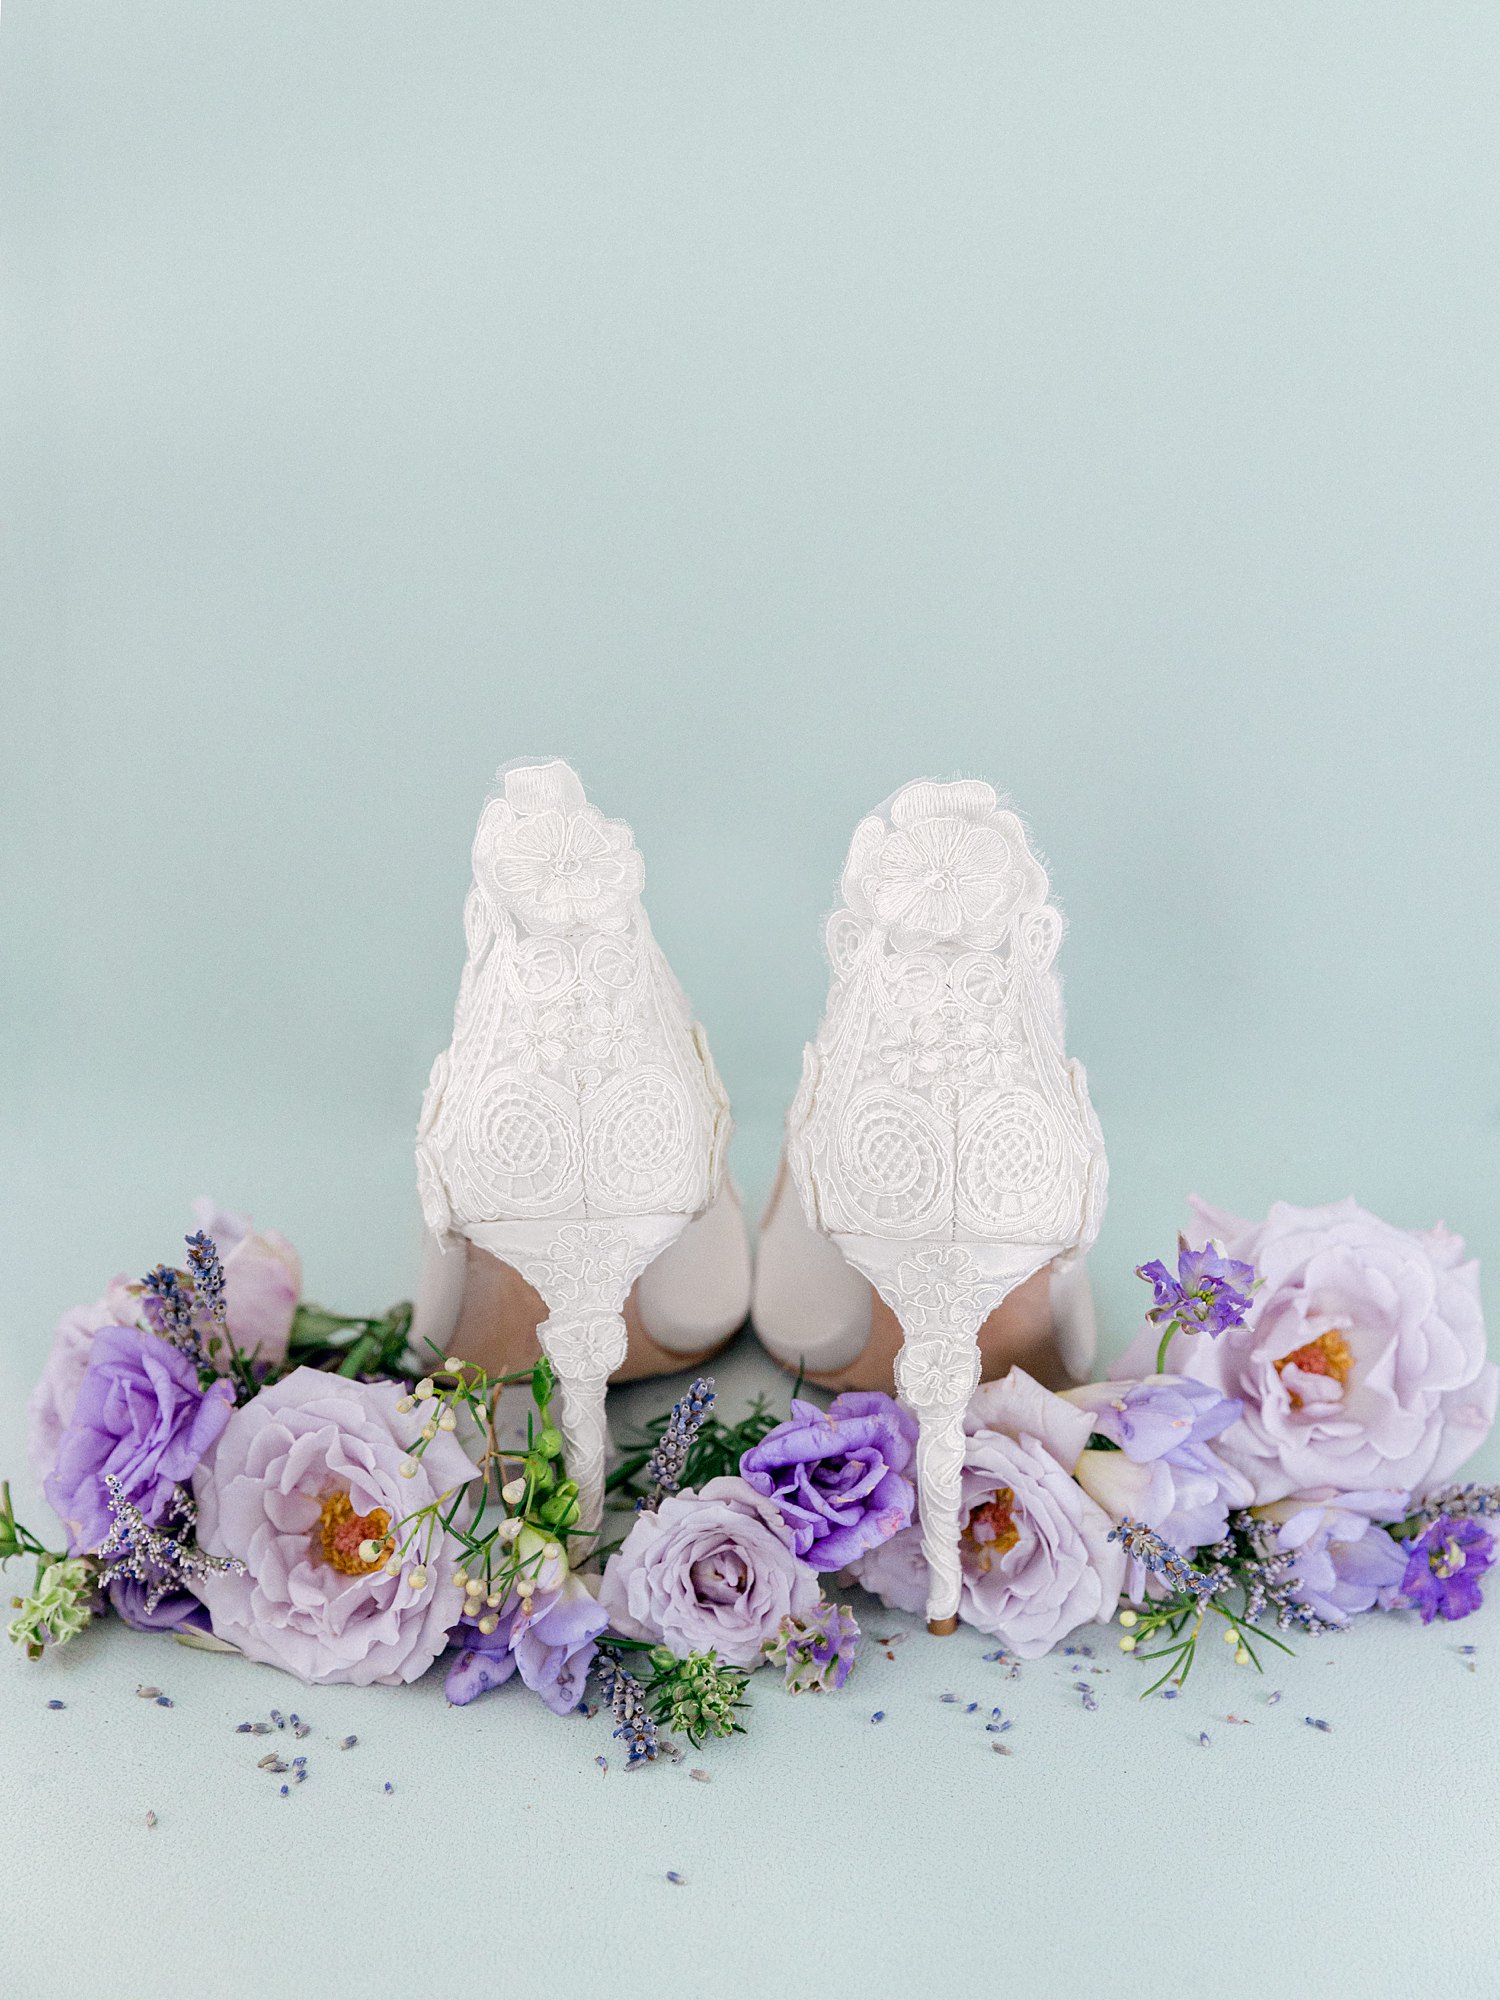 white high heel bridal shoes among purple flowers against green backdrop